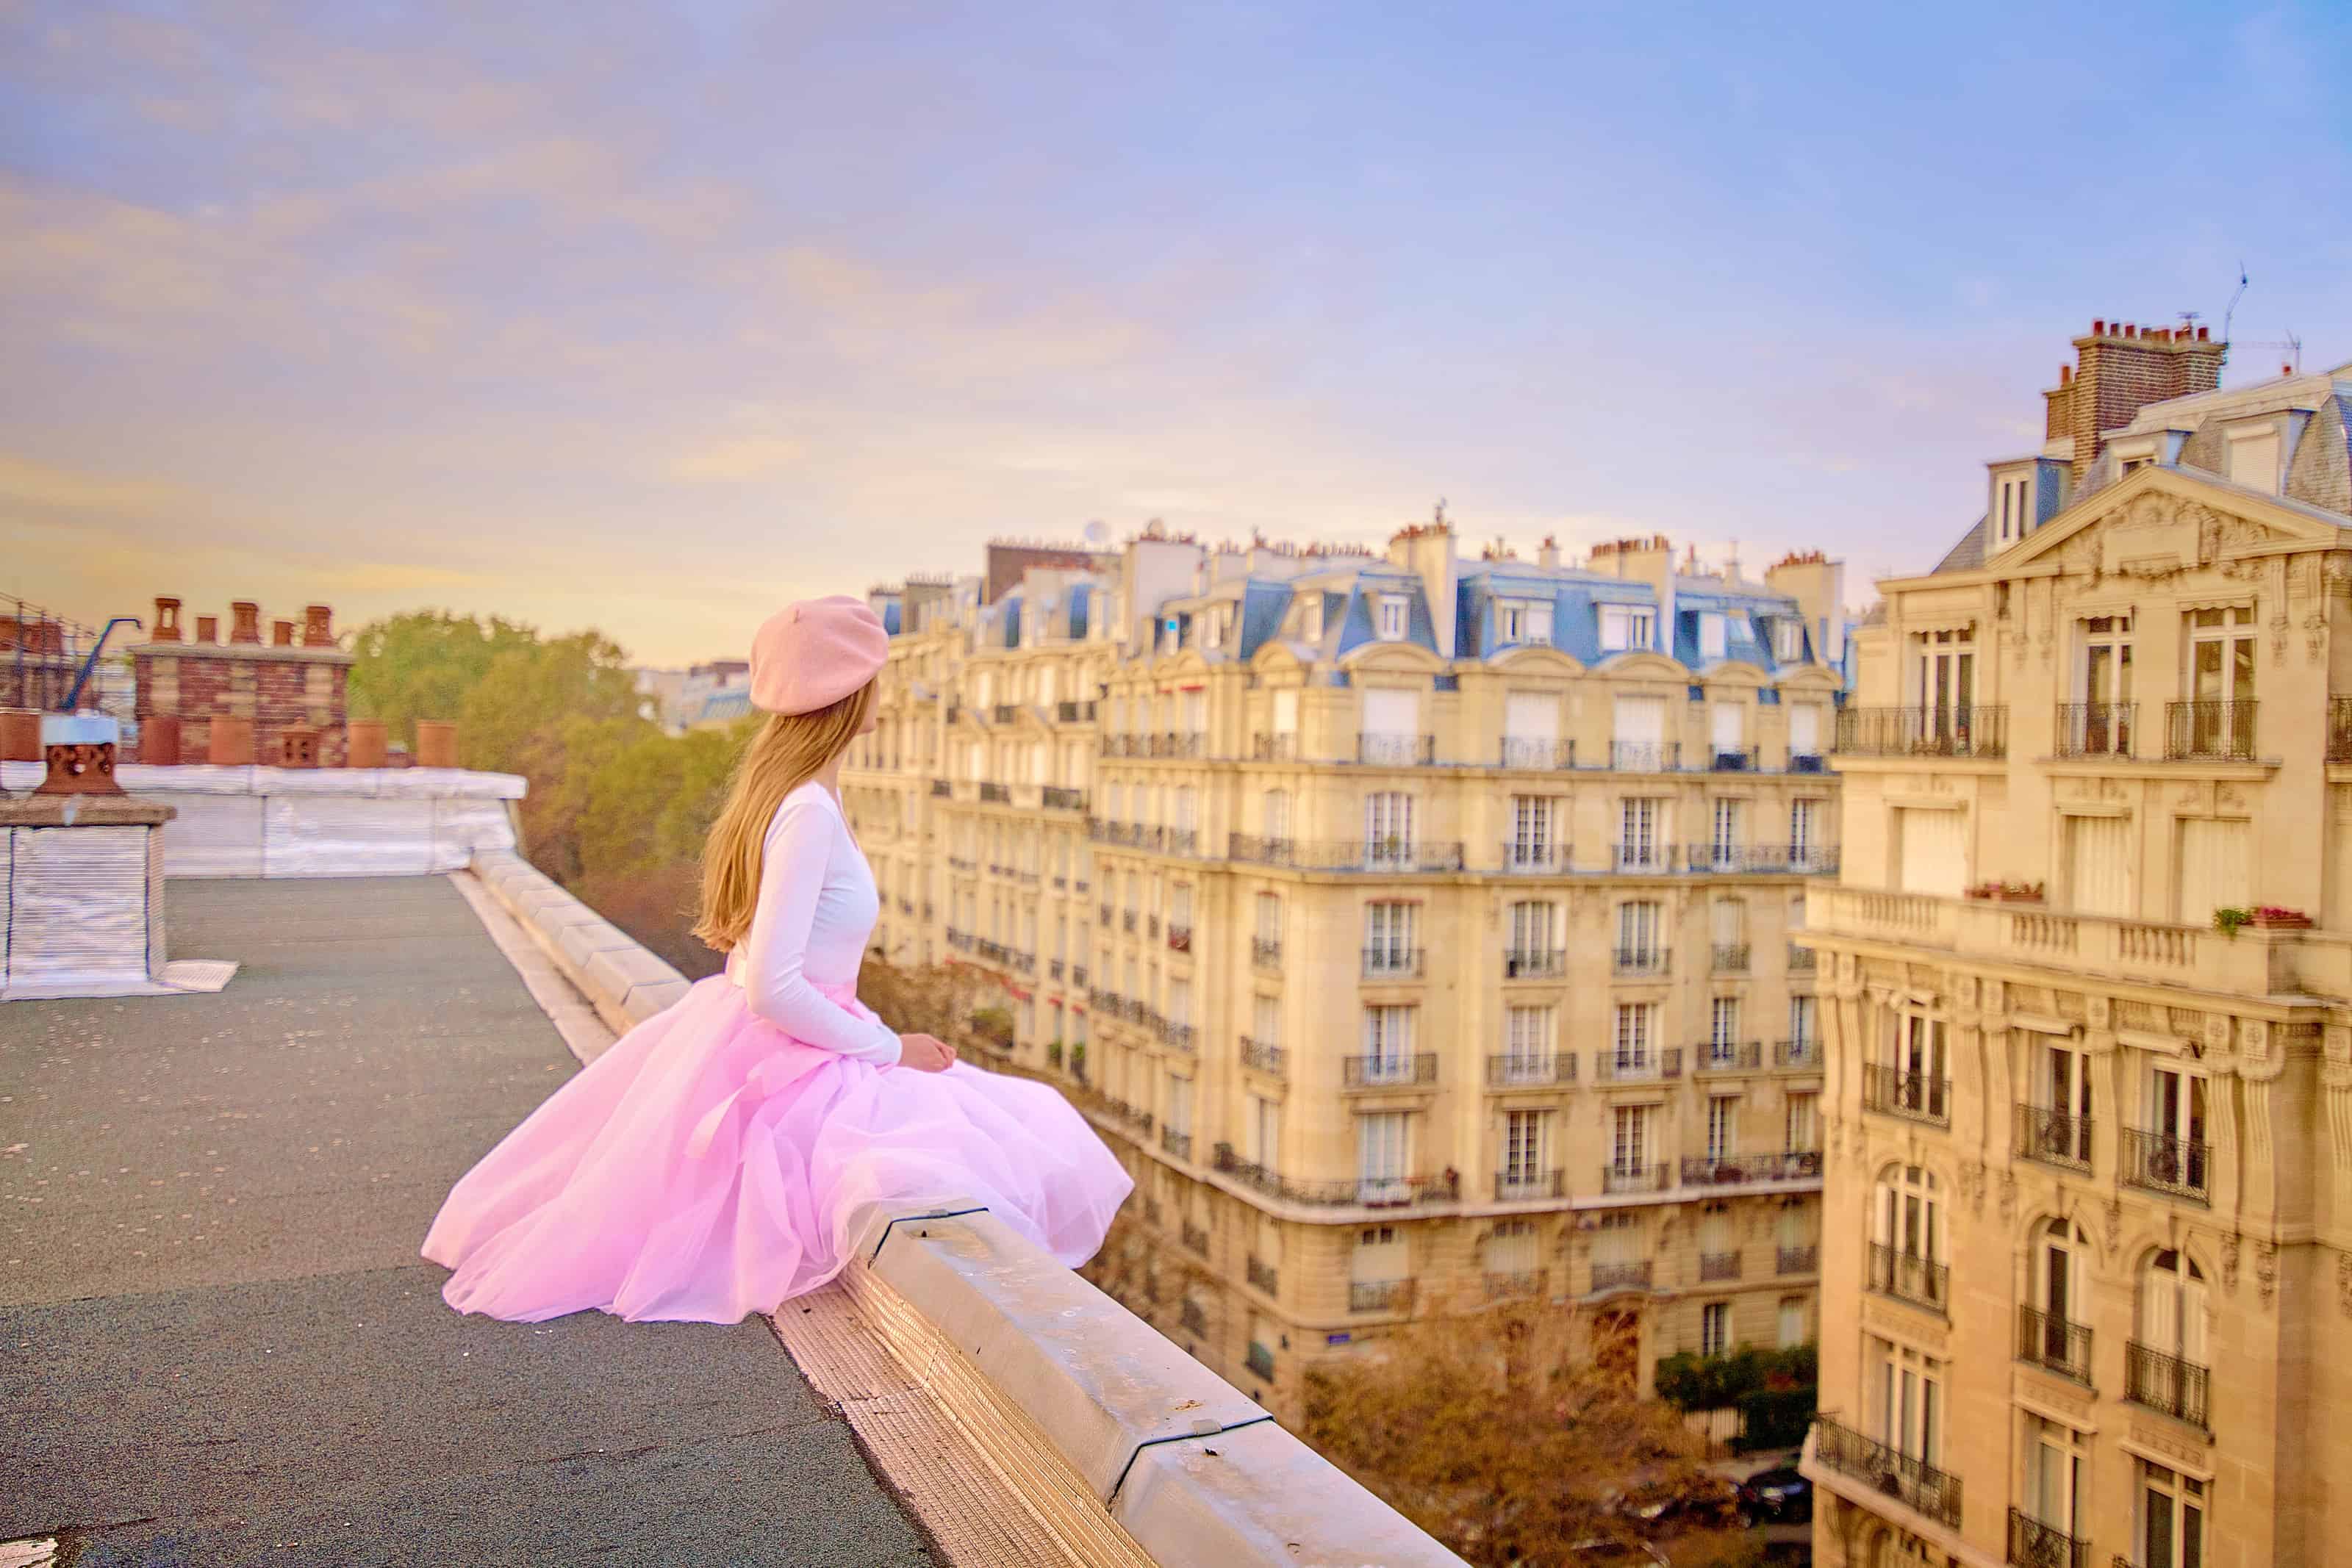 The Ultimate Guide To Looking Fabulous In Travel Photos On Instagram